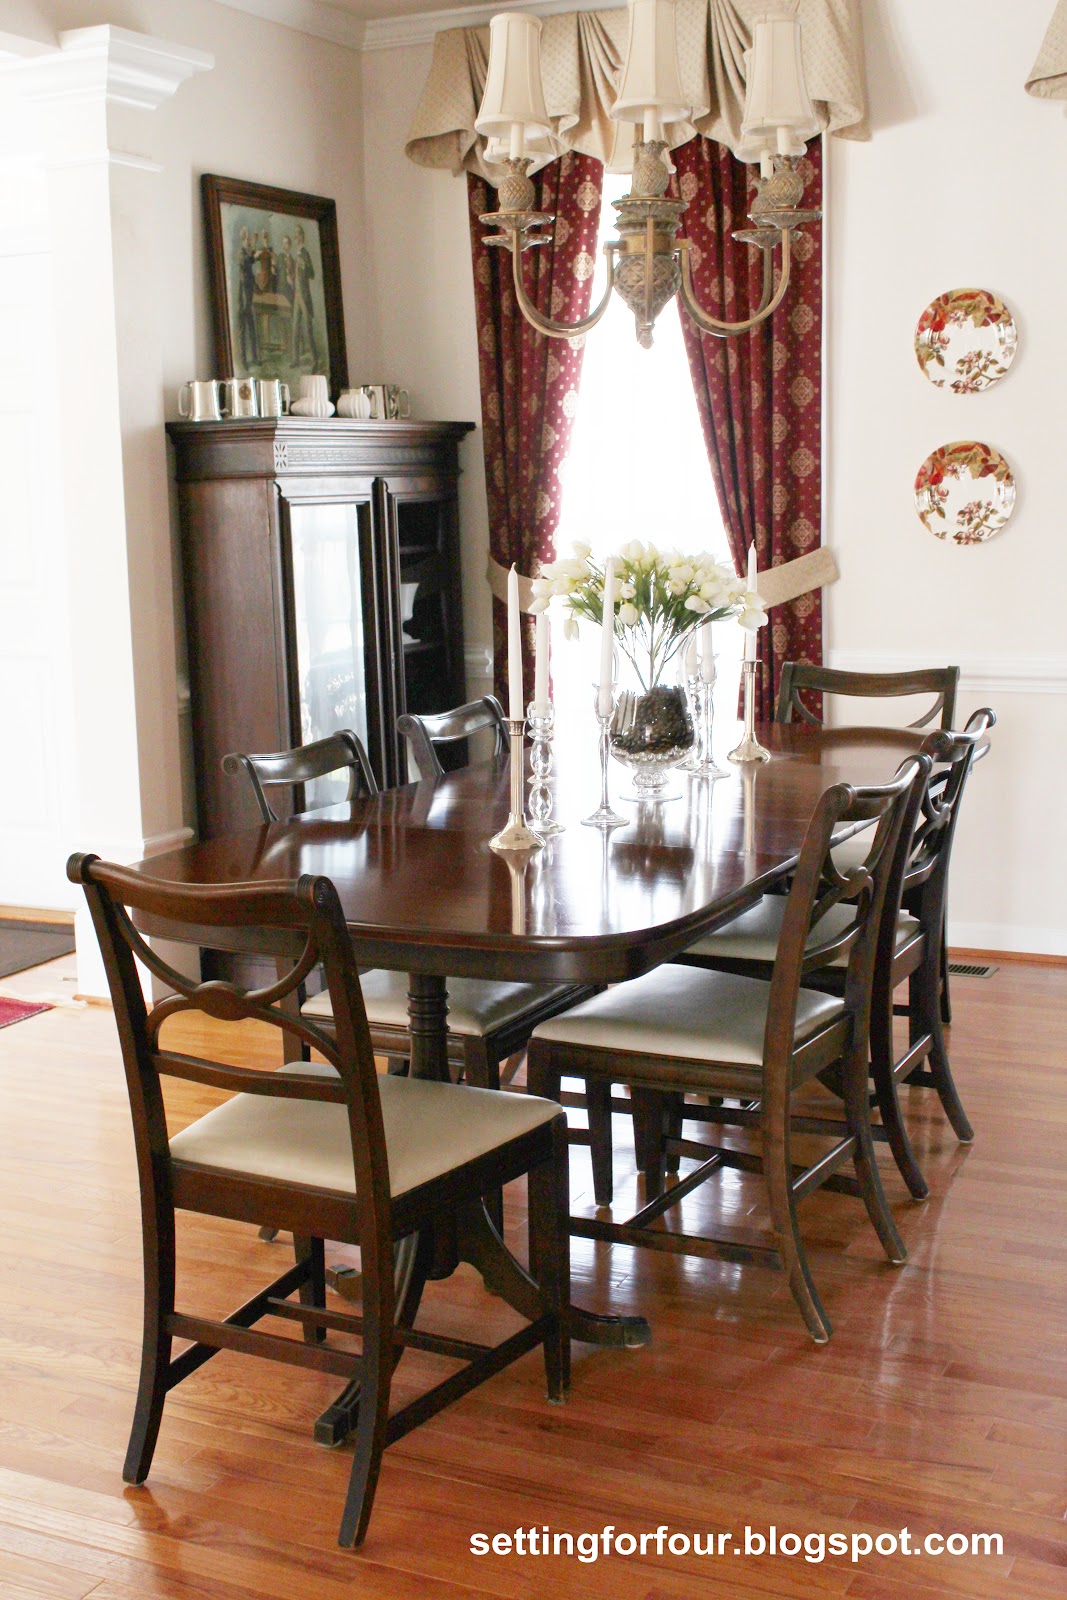 My Space: Dining Room - Setting for Four